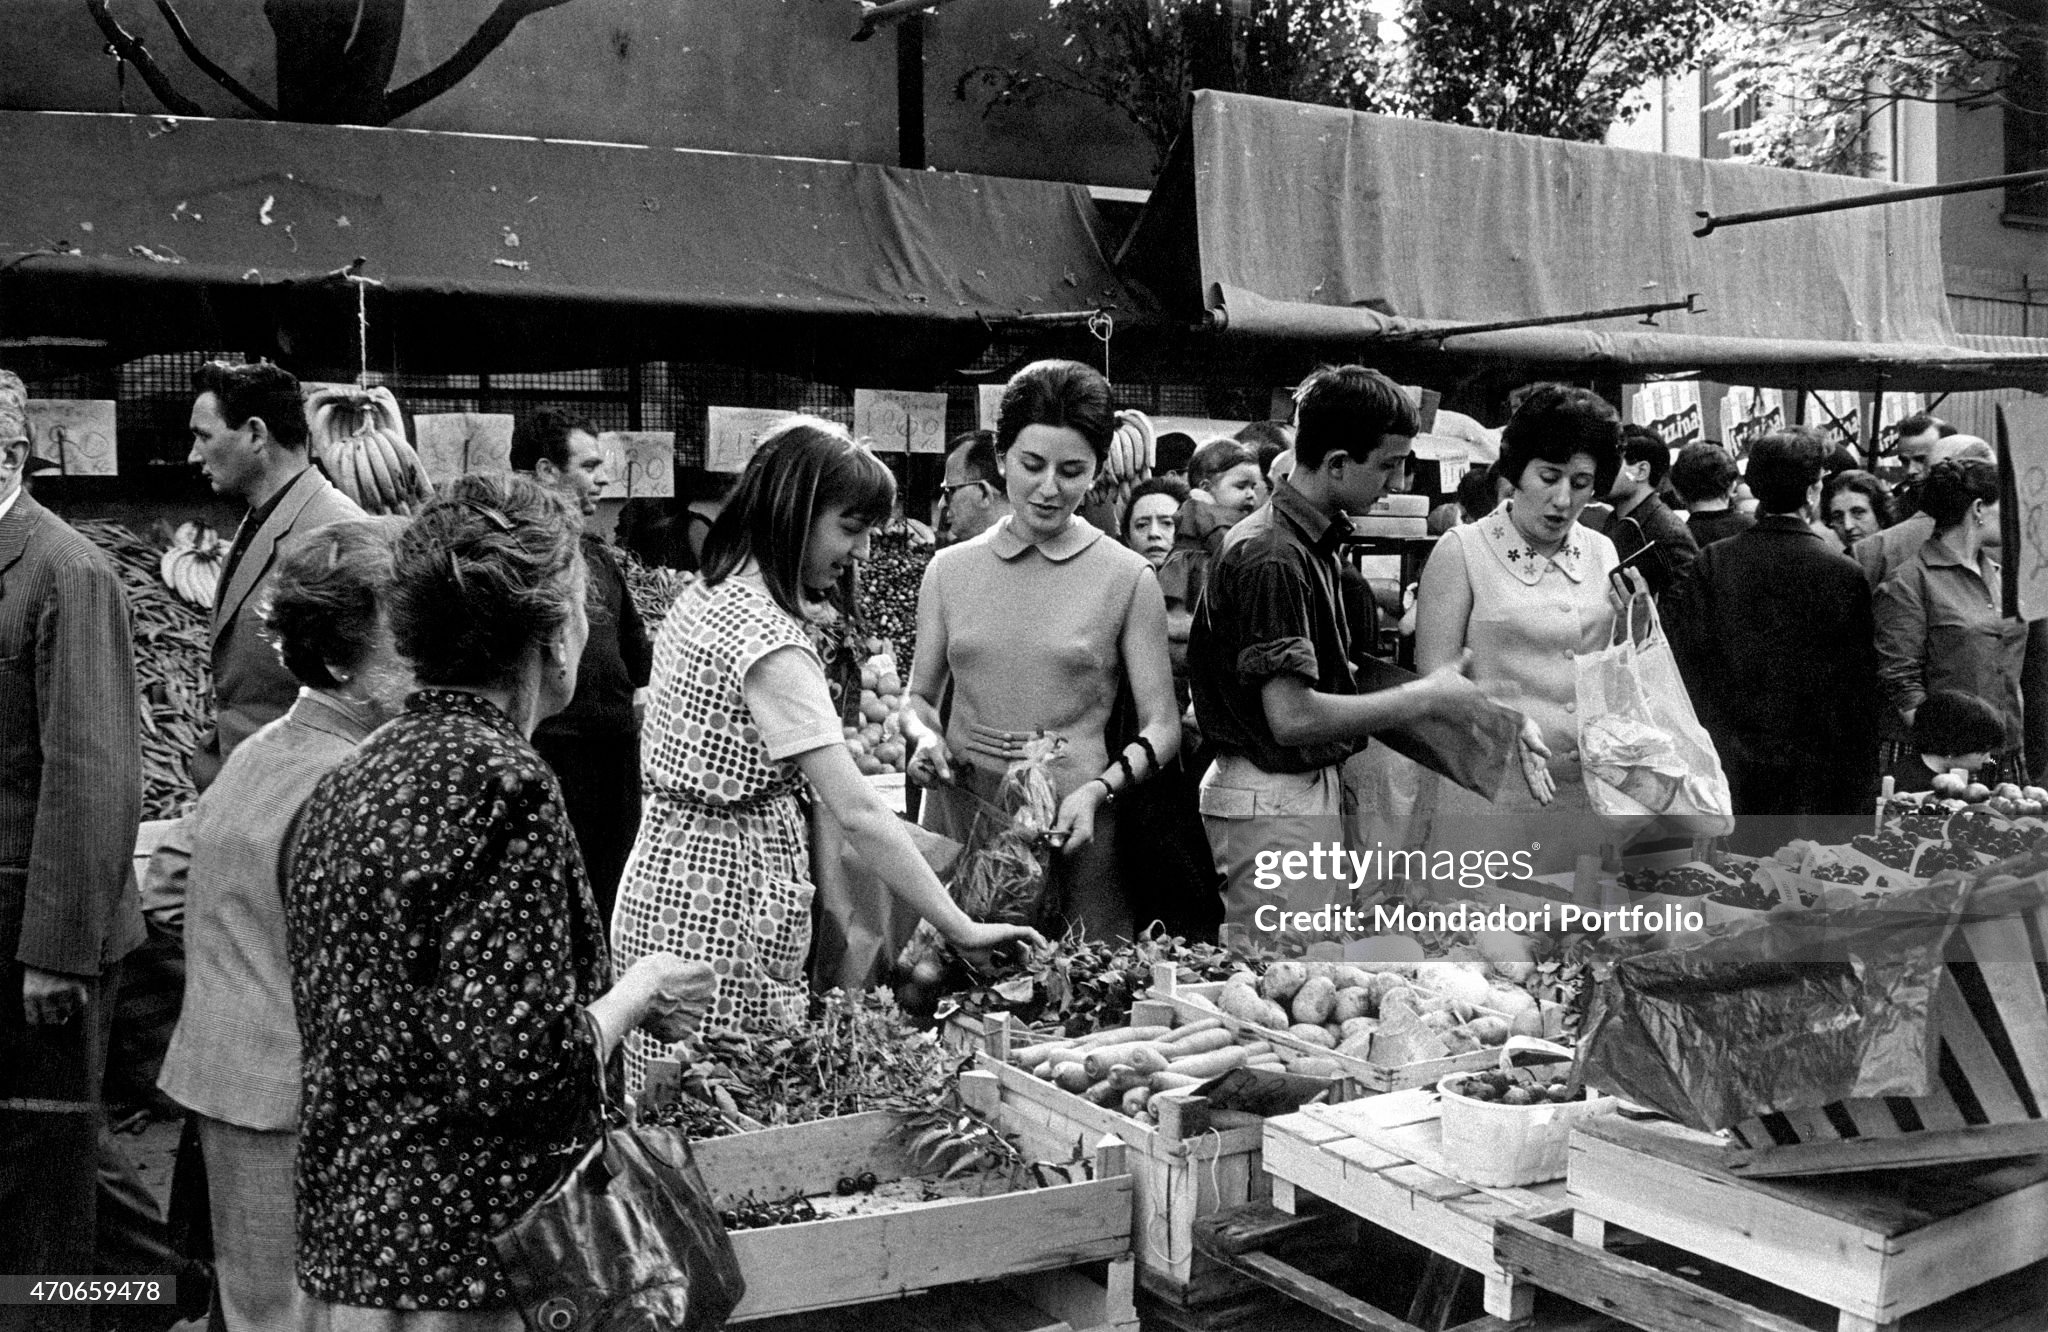 Some women choose fruits and vegetables from a stall in an open market place in Milan, Italy, on 04 December 1970. 